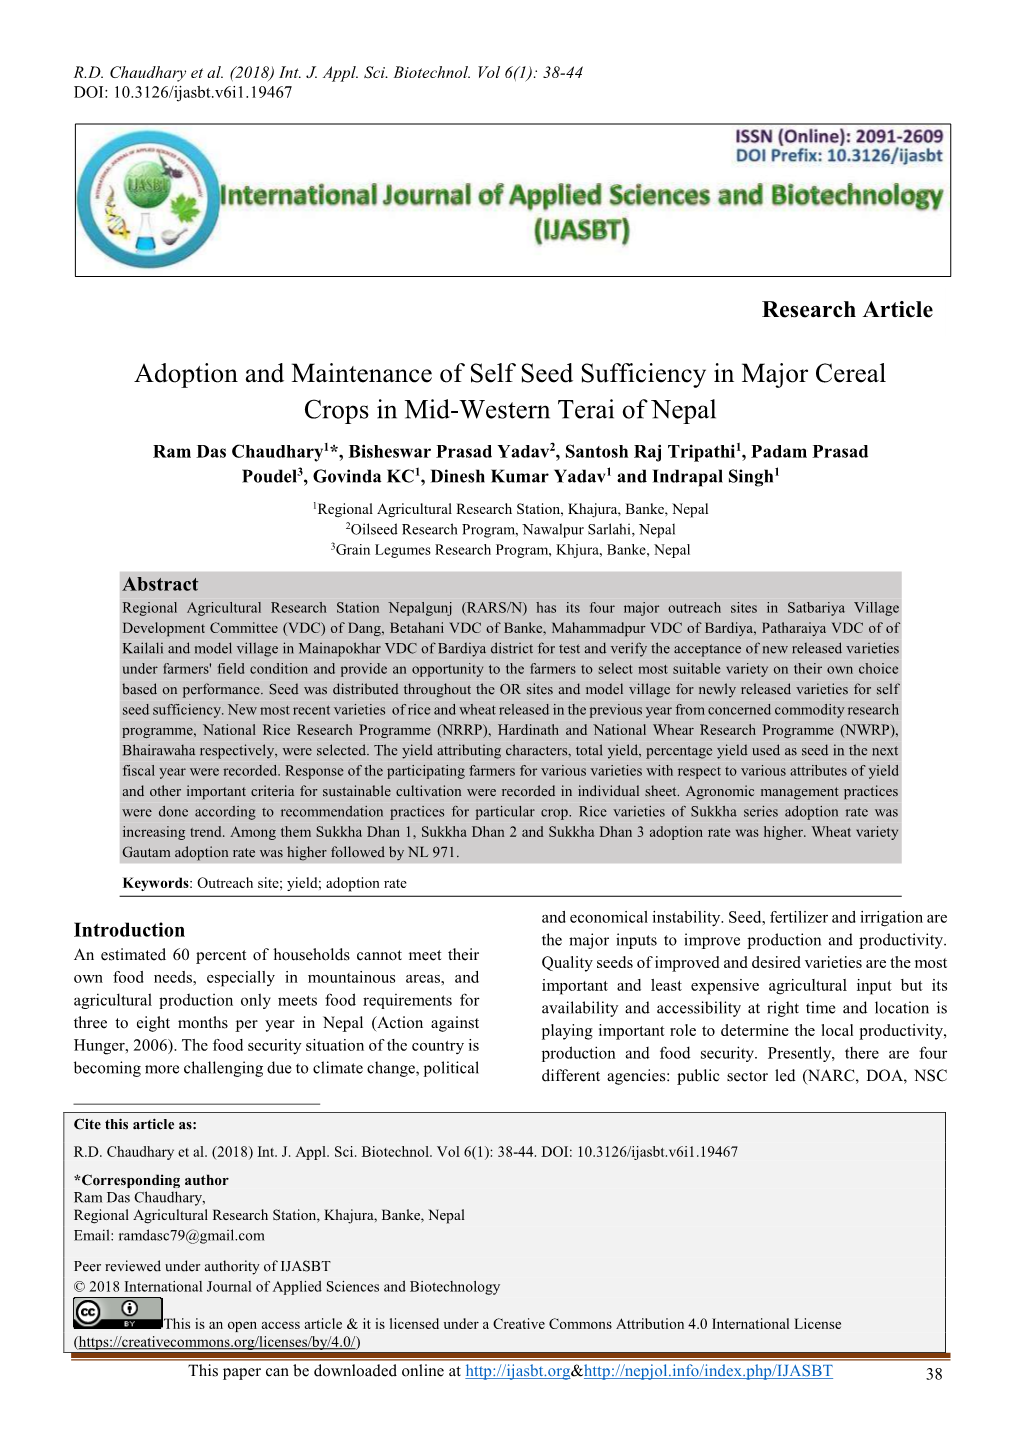 Adoption and Maintenance of Self Seed Sufficiency in Major Cereal